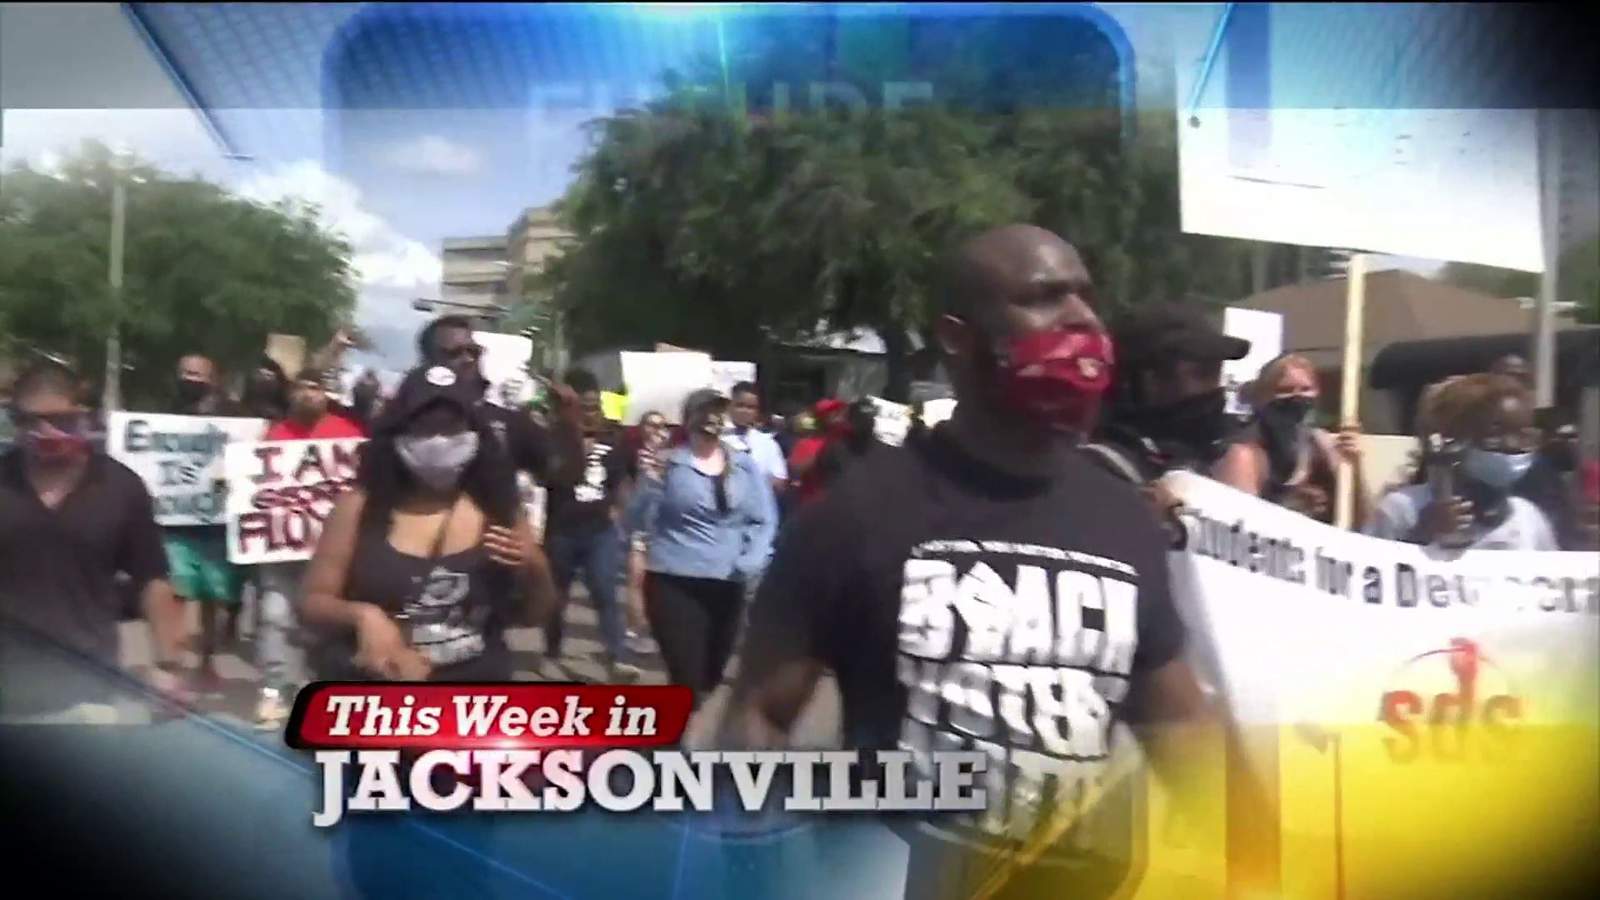 Protesting, race relations in Jacksonville; Where JEA probe stands; Possible hurdles for prosecutors in George Floyds death